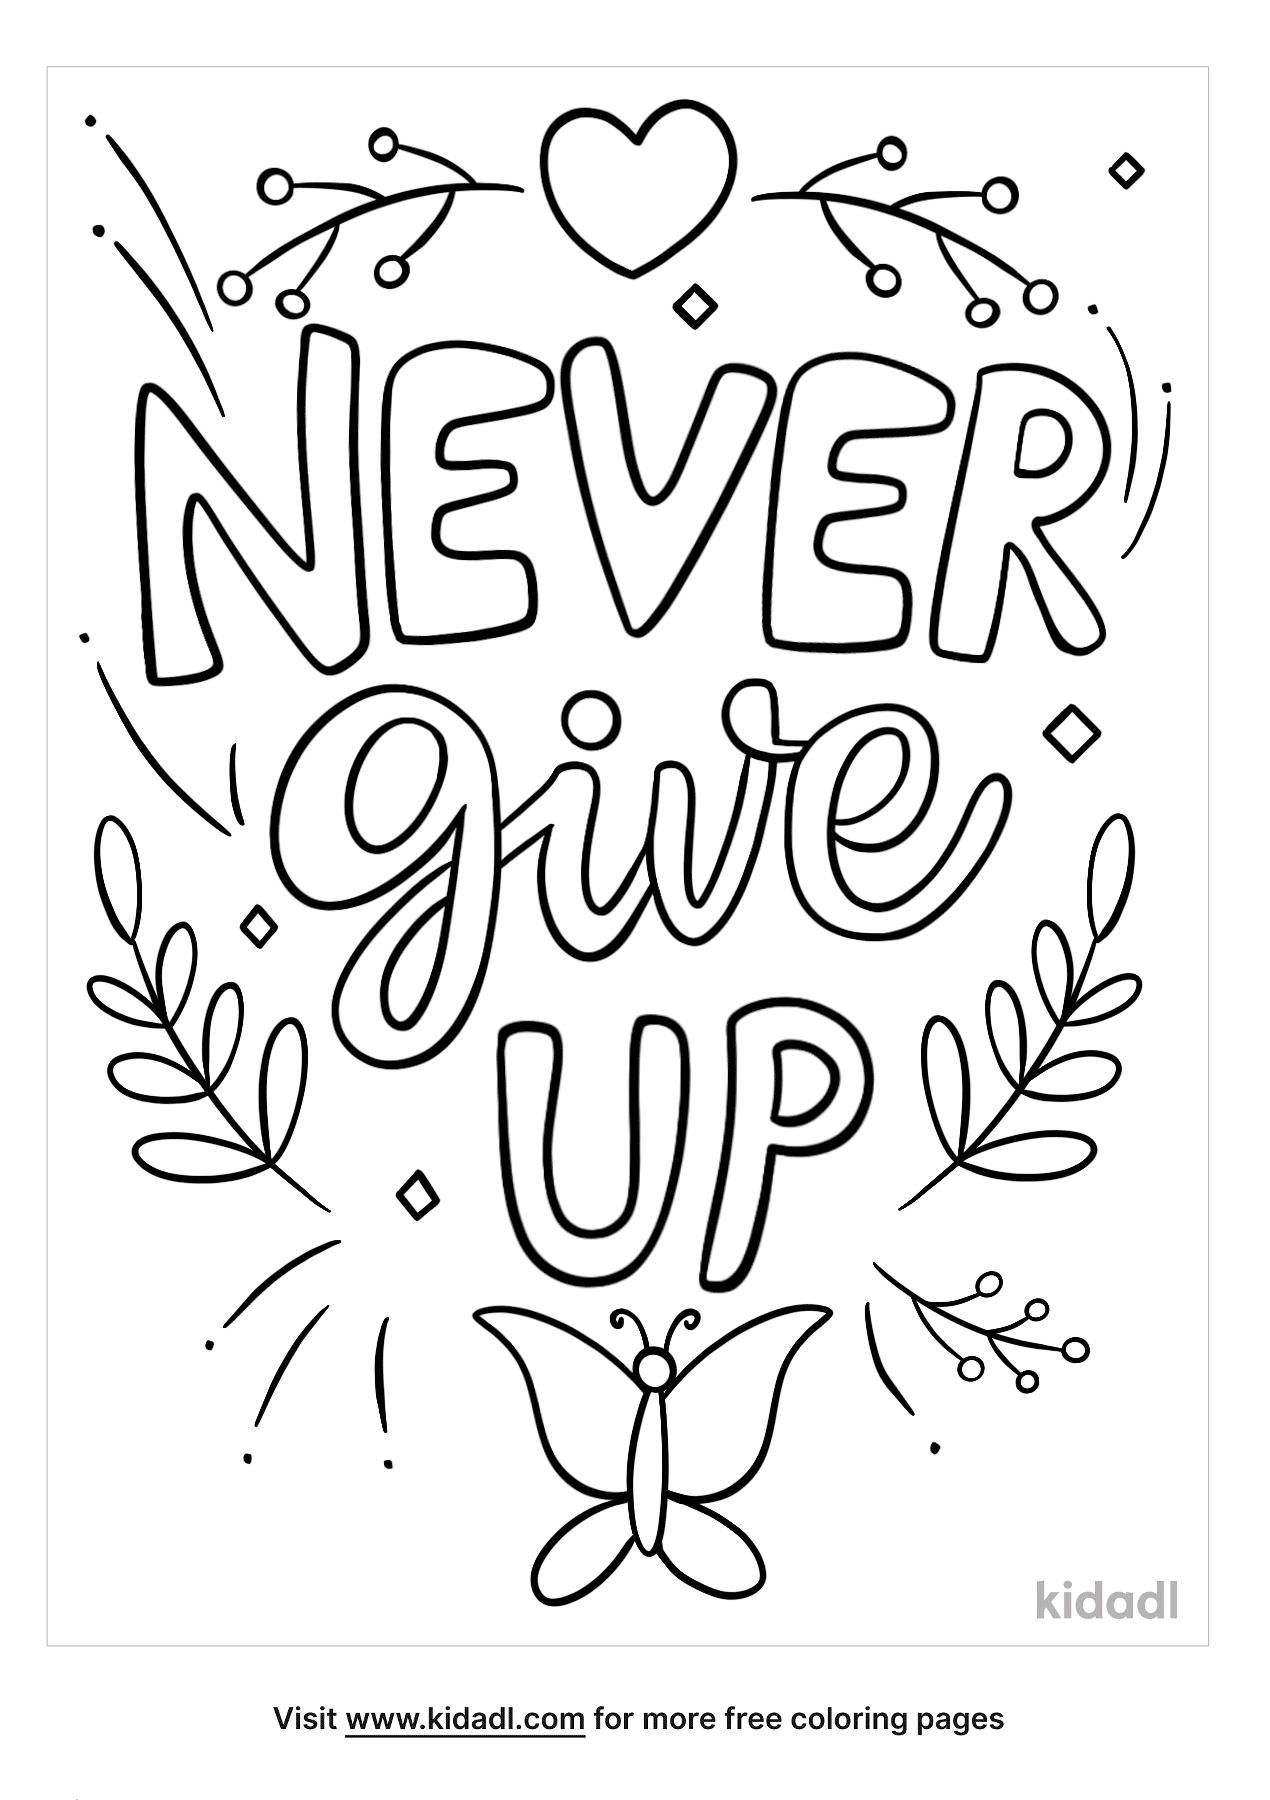 Never Give Up Coloring Pages | Free Words & Quotes Coloring Pages | Kidadl